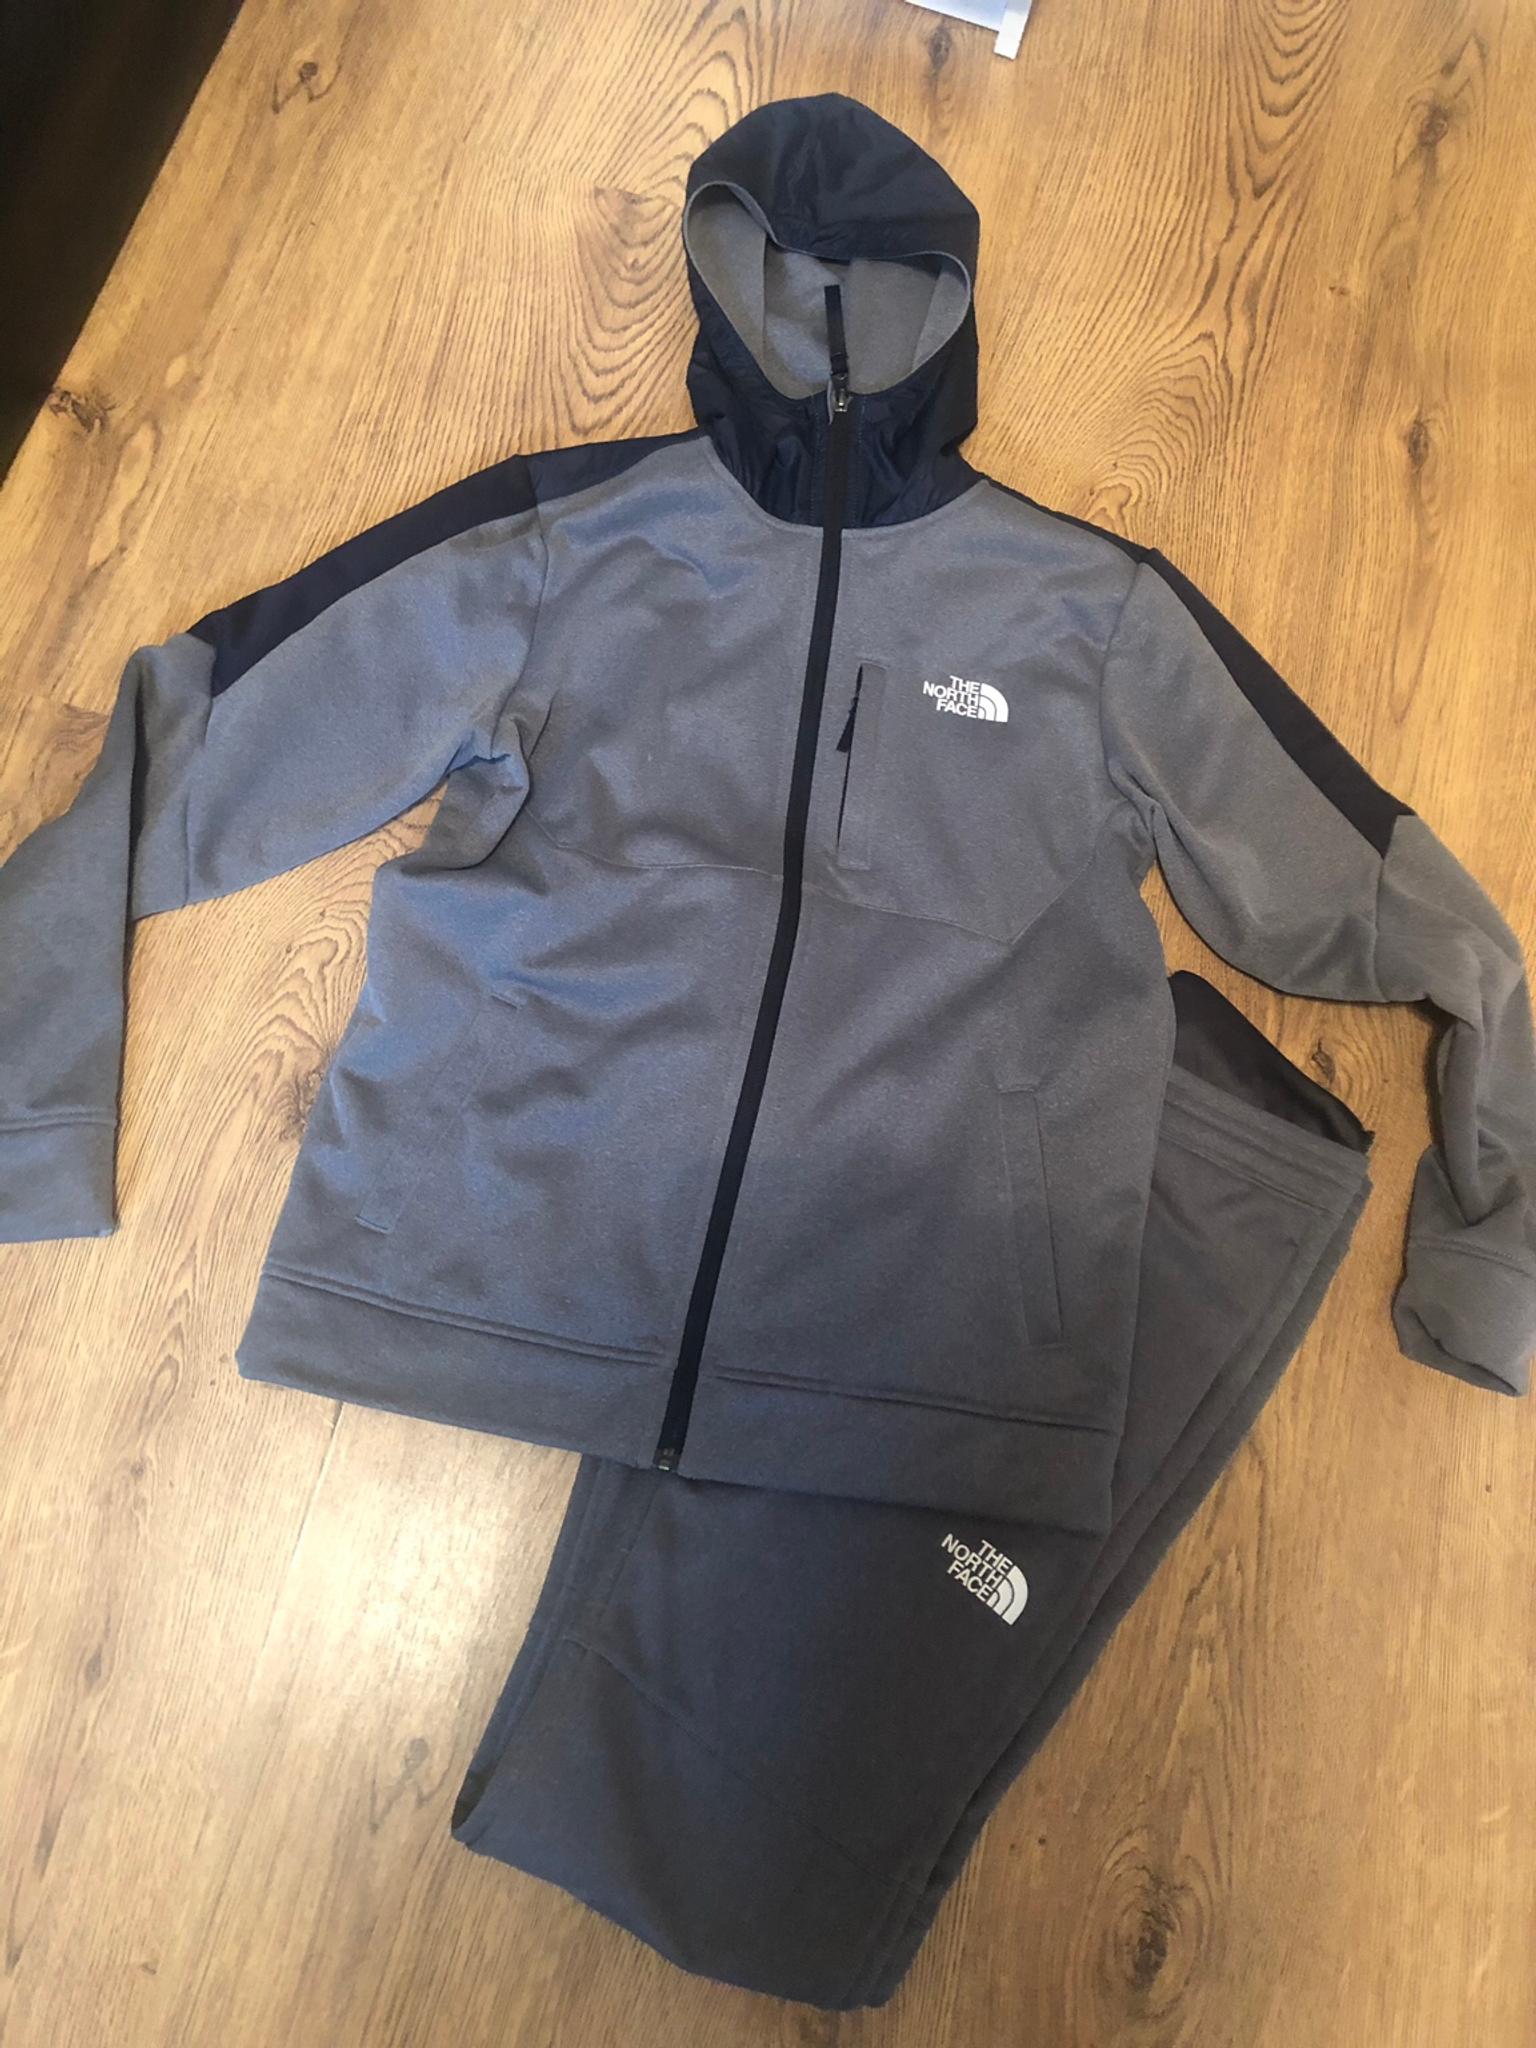 North Face Tracksuit Age 14 Shop Clothing Shoes Online